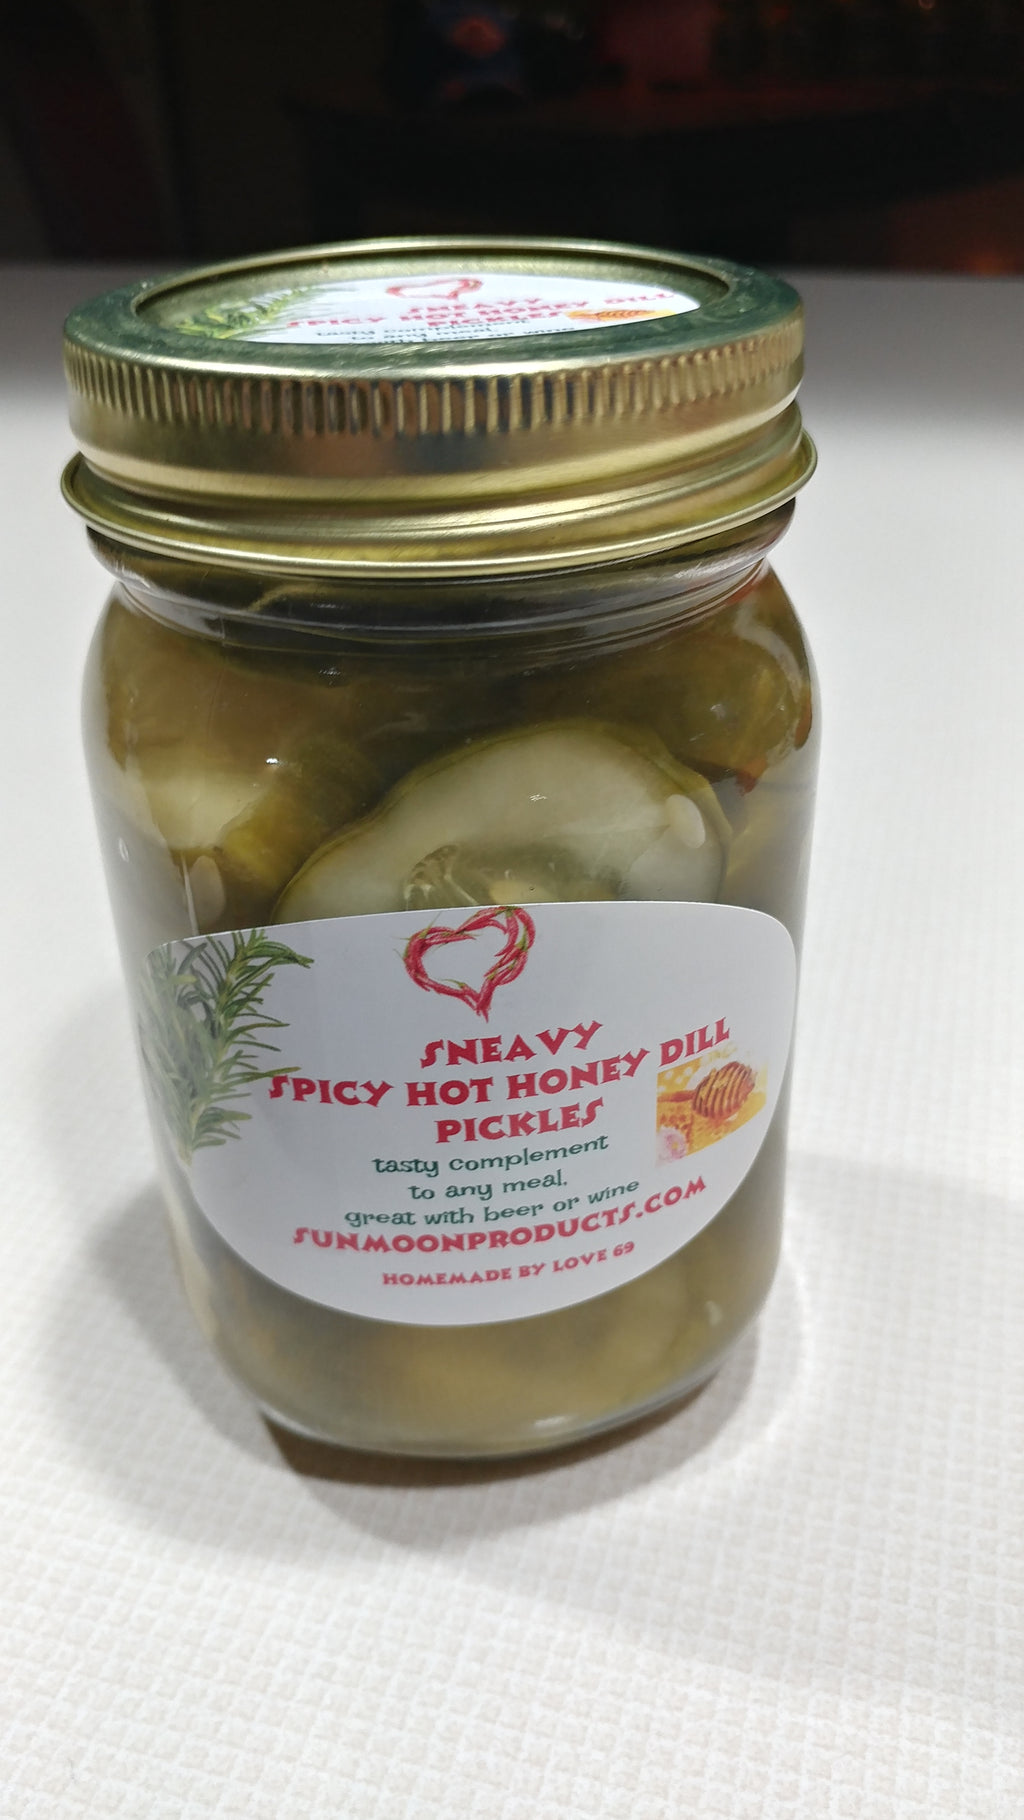 Sneavy Spicy Hot Honey Dill Pickles 1 Quart